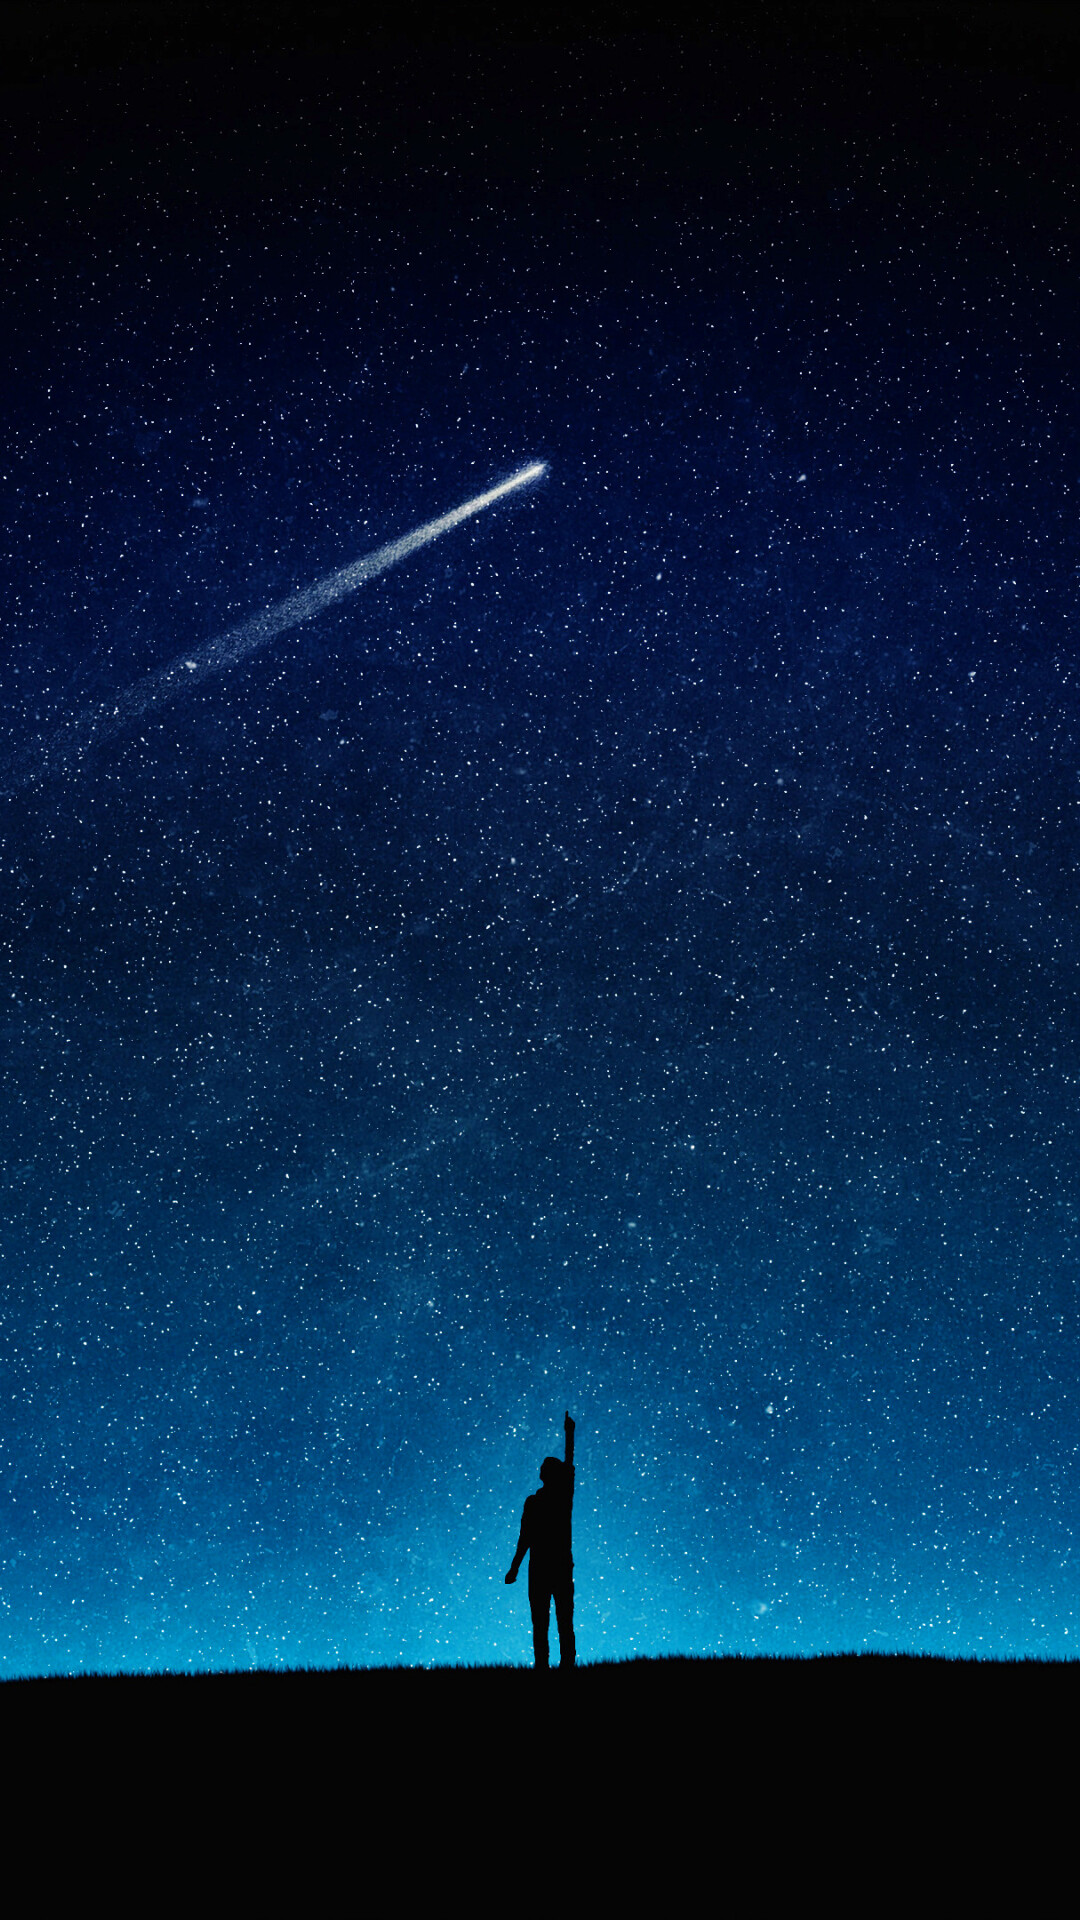 Comet: The closest point in an object's orbit to the Sun is called “perihelion”. 1080x1920 Full HD Background.